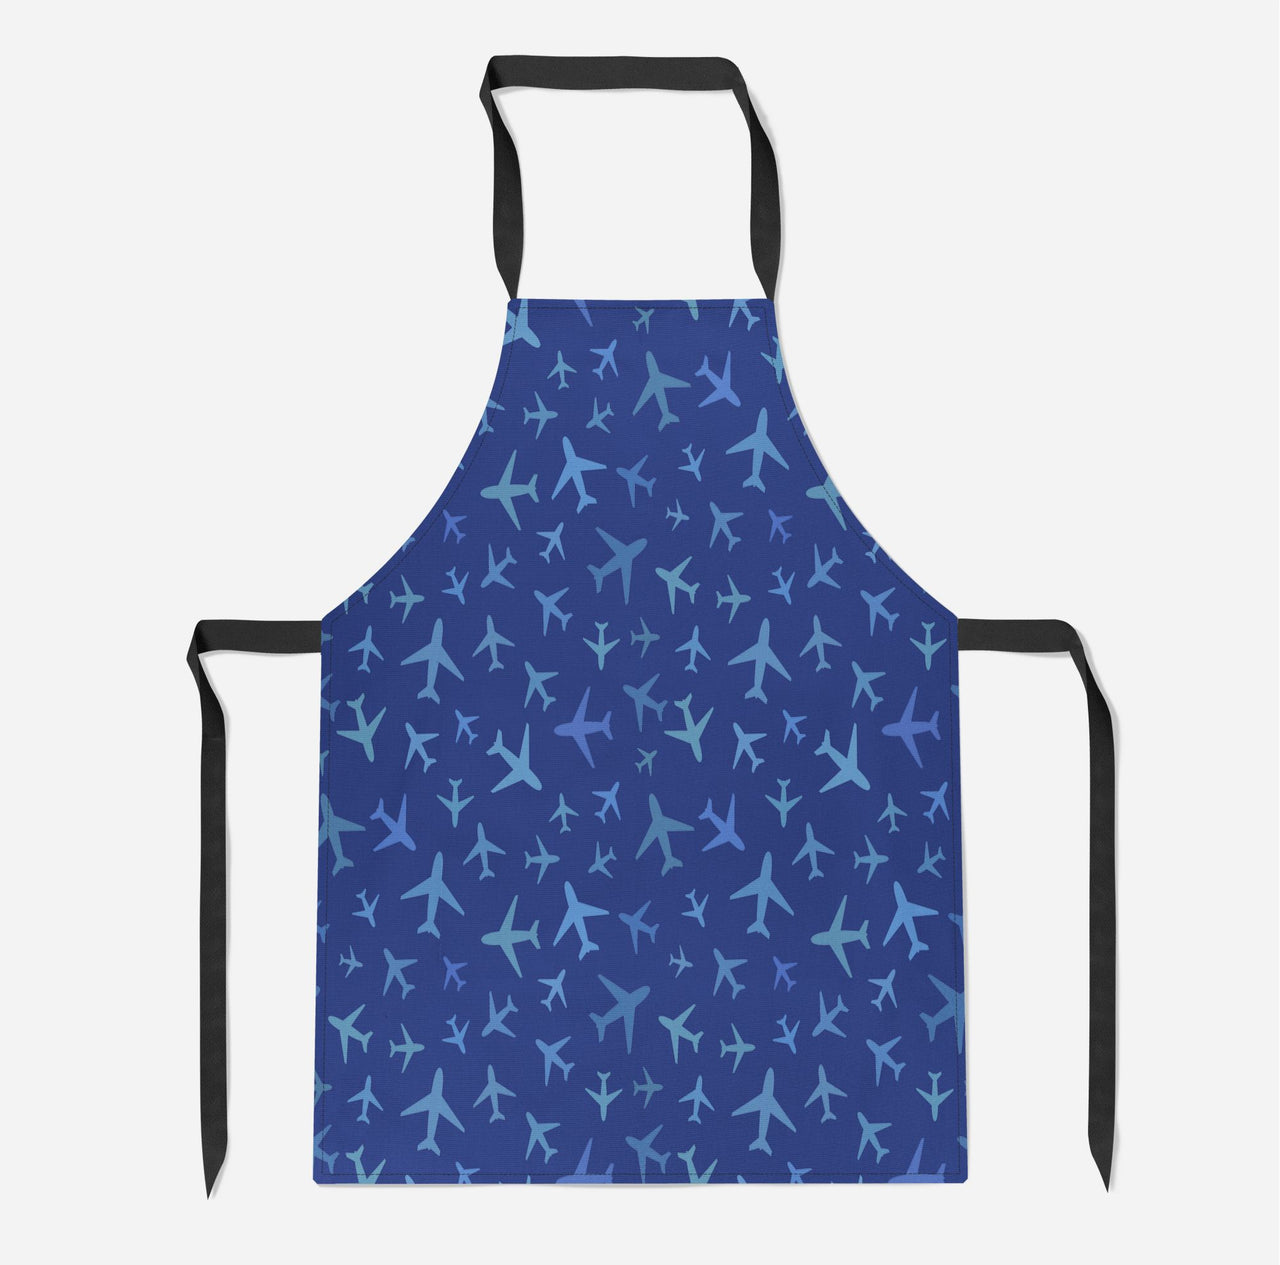 Many Airplanes Blue Designed Kitchen Aprons